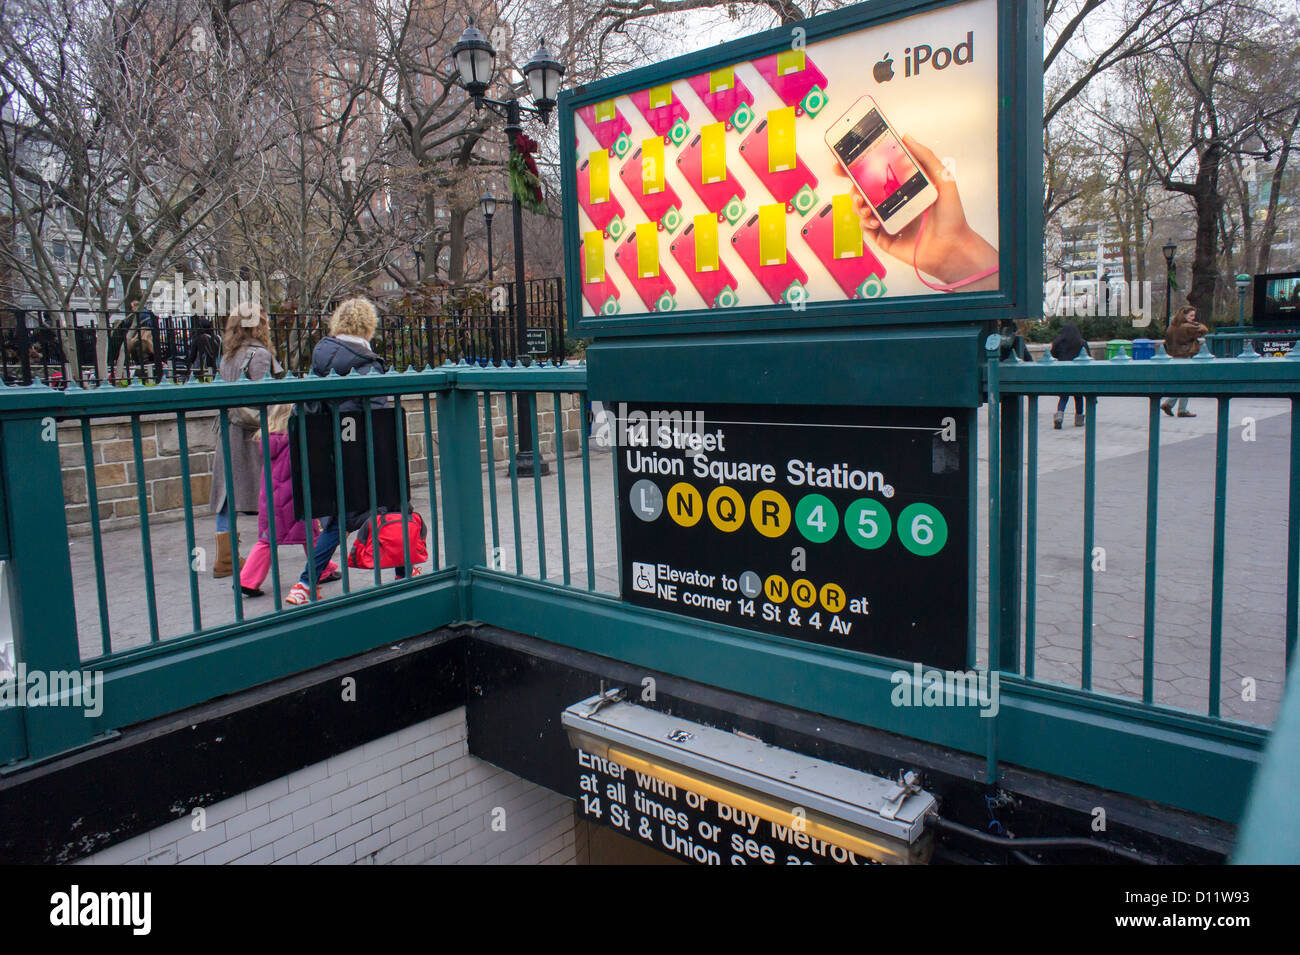 Advertising for the Apple's line of iPods on a subway kiosk in New York on Sunday, December 2, 2012. (© Richard B. Levine) Stock Photo